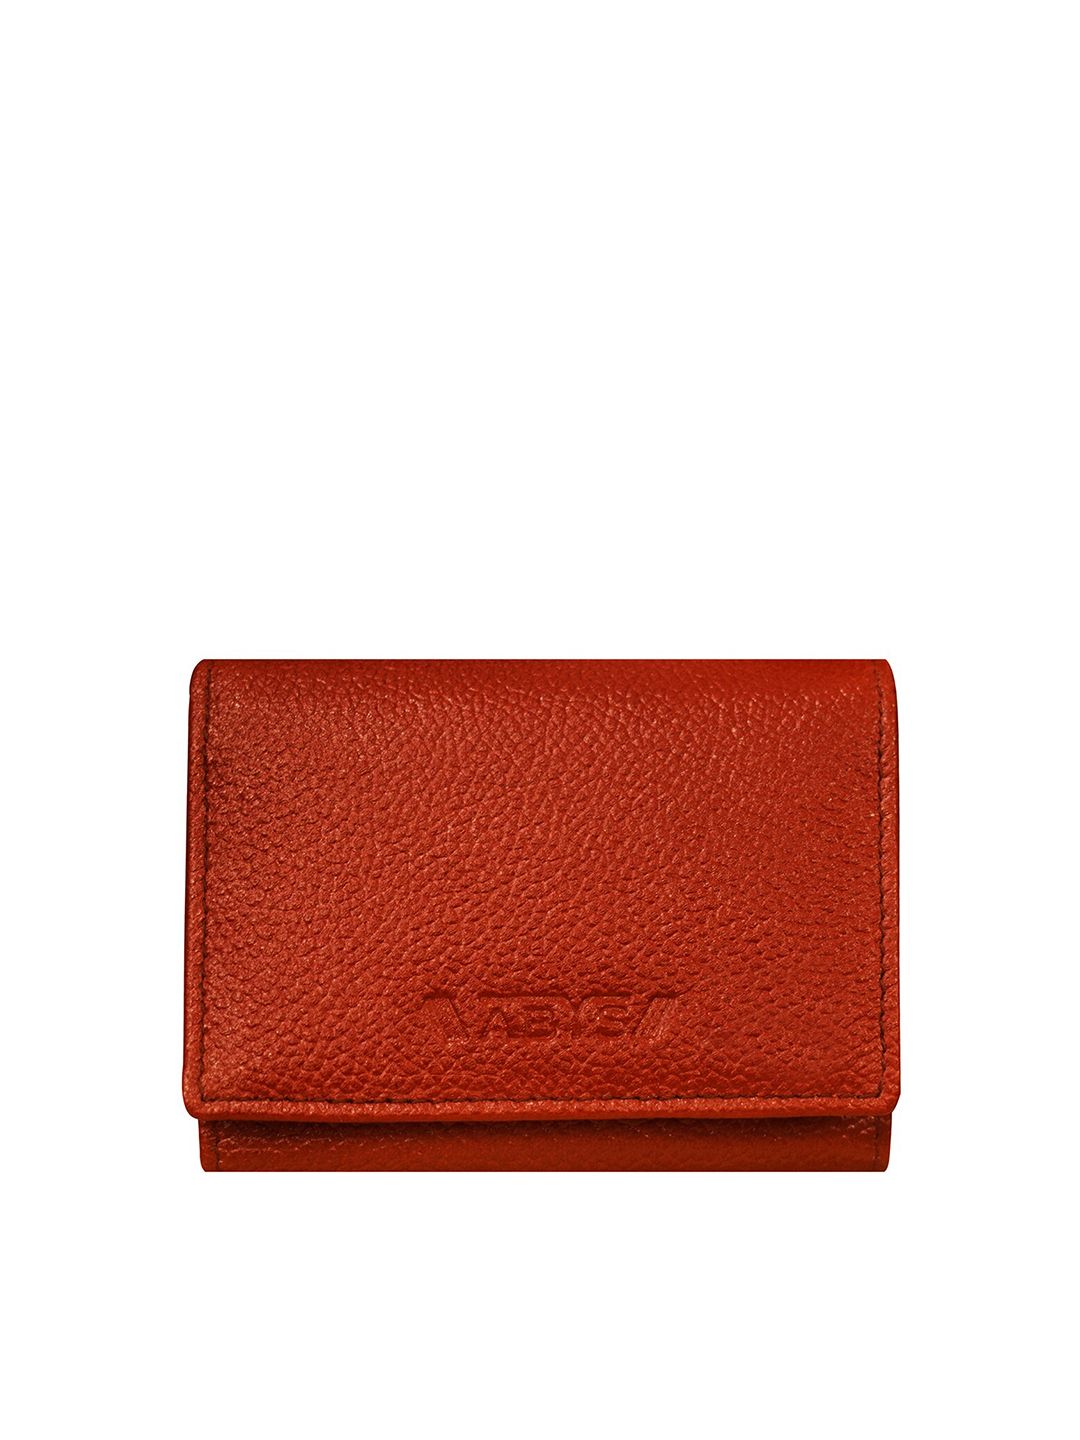 ABYS Unisex Brown Textured Leather Two Fold Wallet Price in India